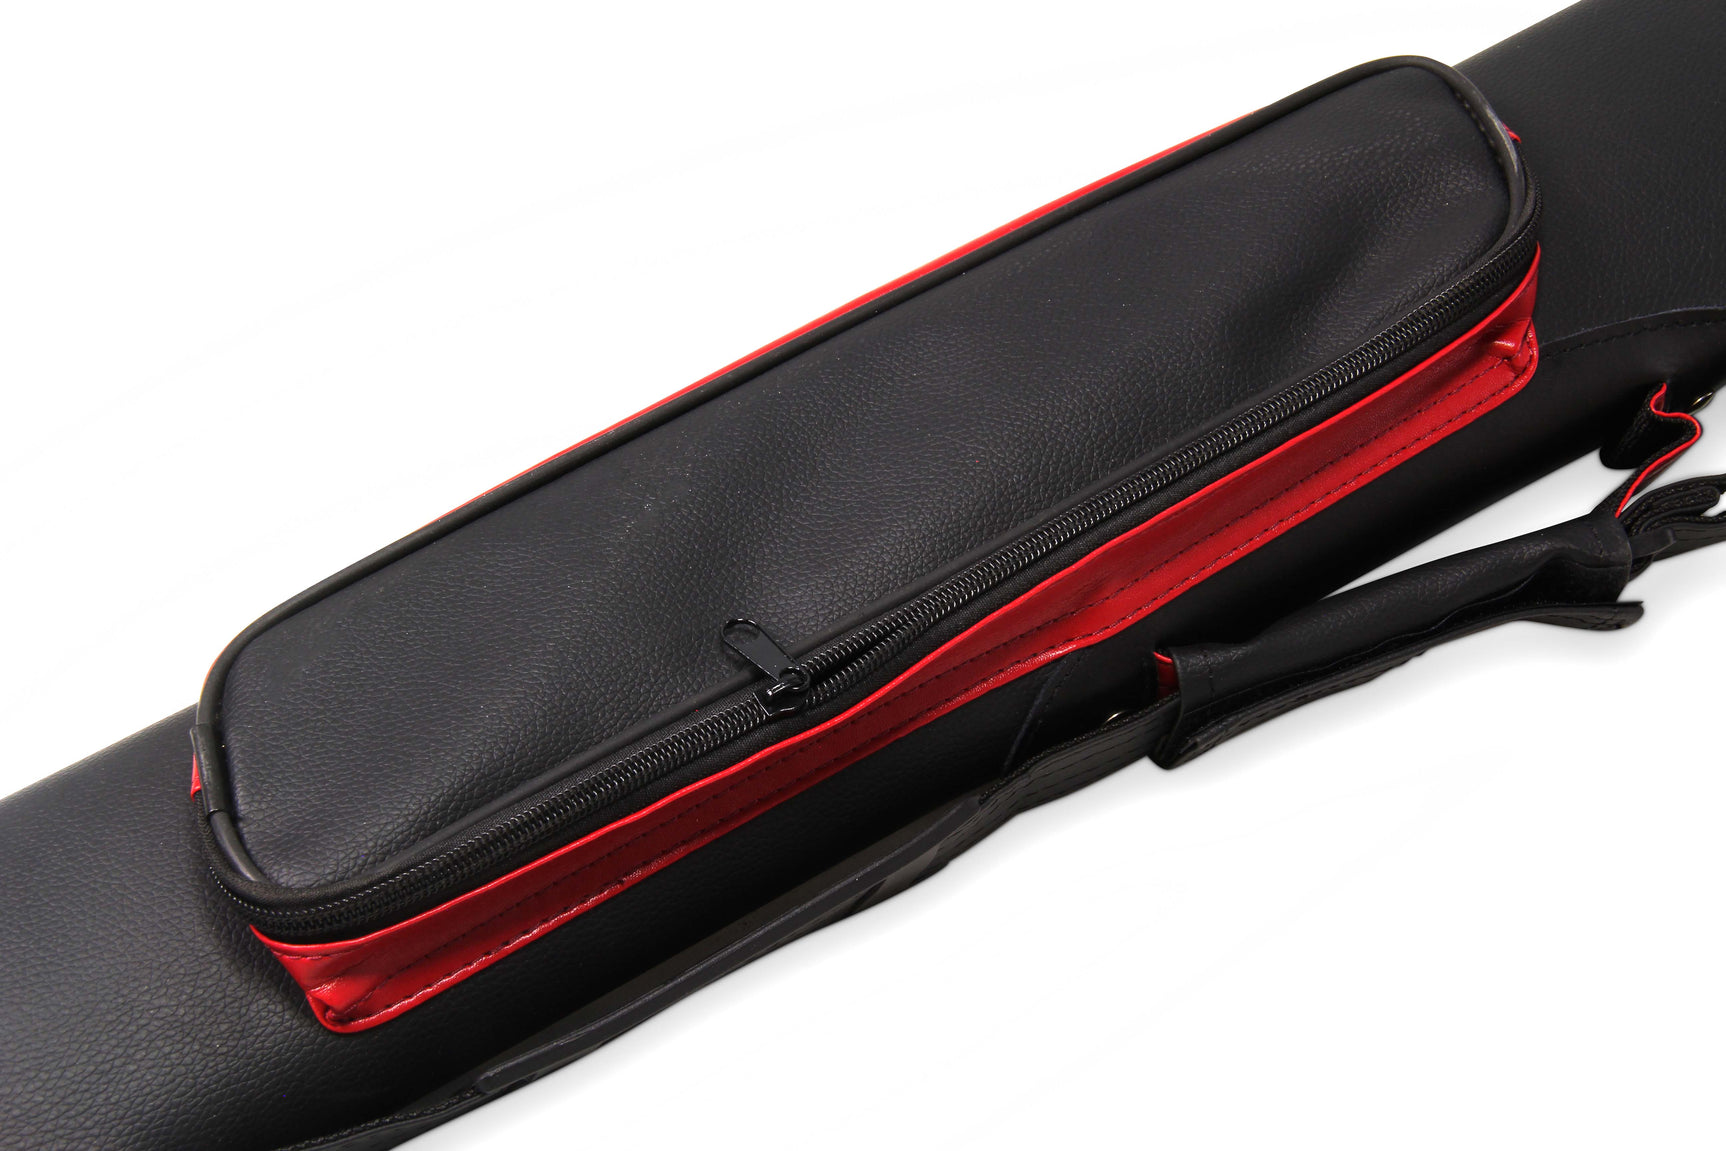 Baize Master STRIPE Oval QUAD Snooker Pool Cue Case - Holds Two 2 Piece Cues